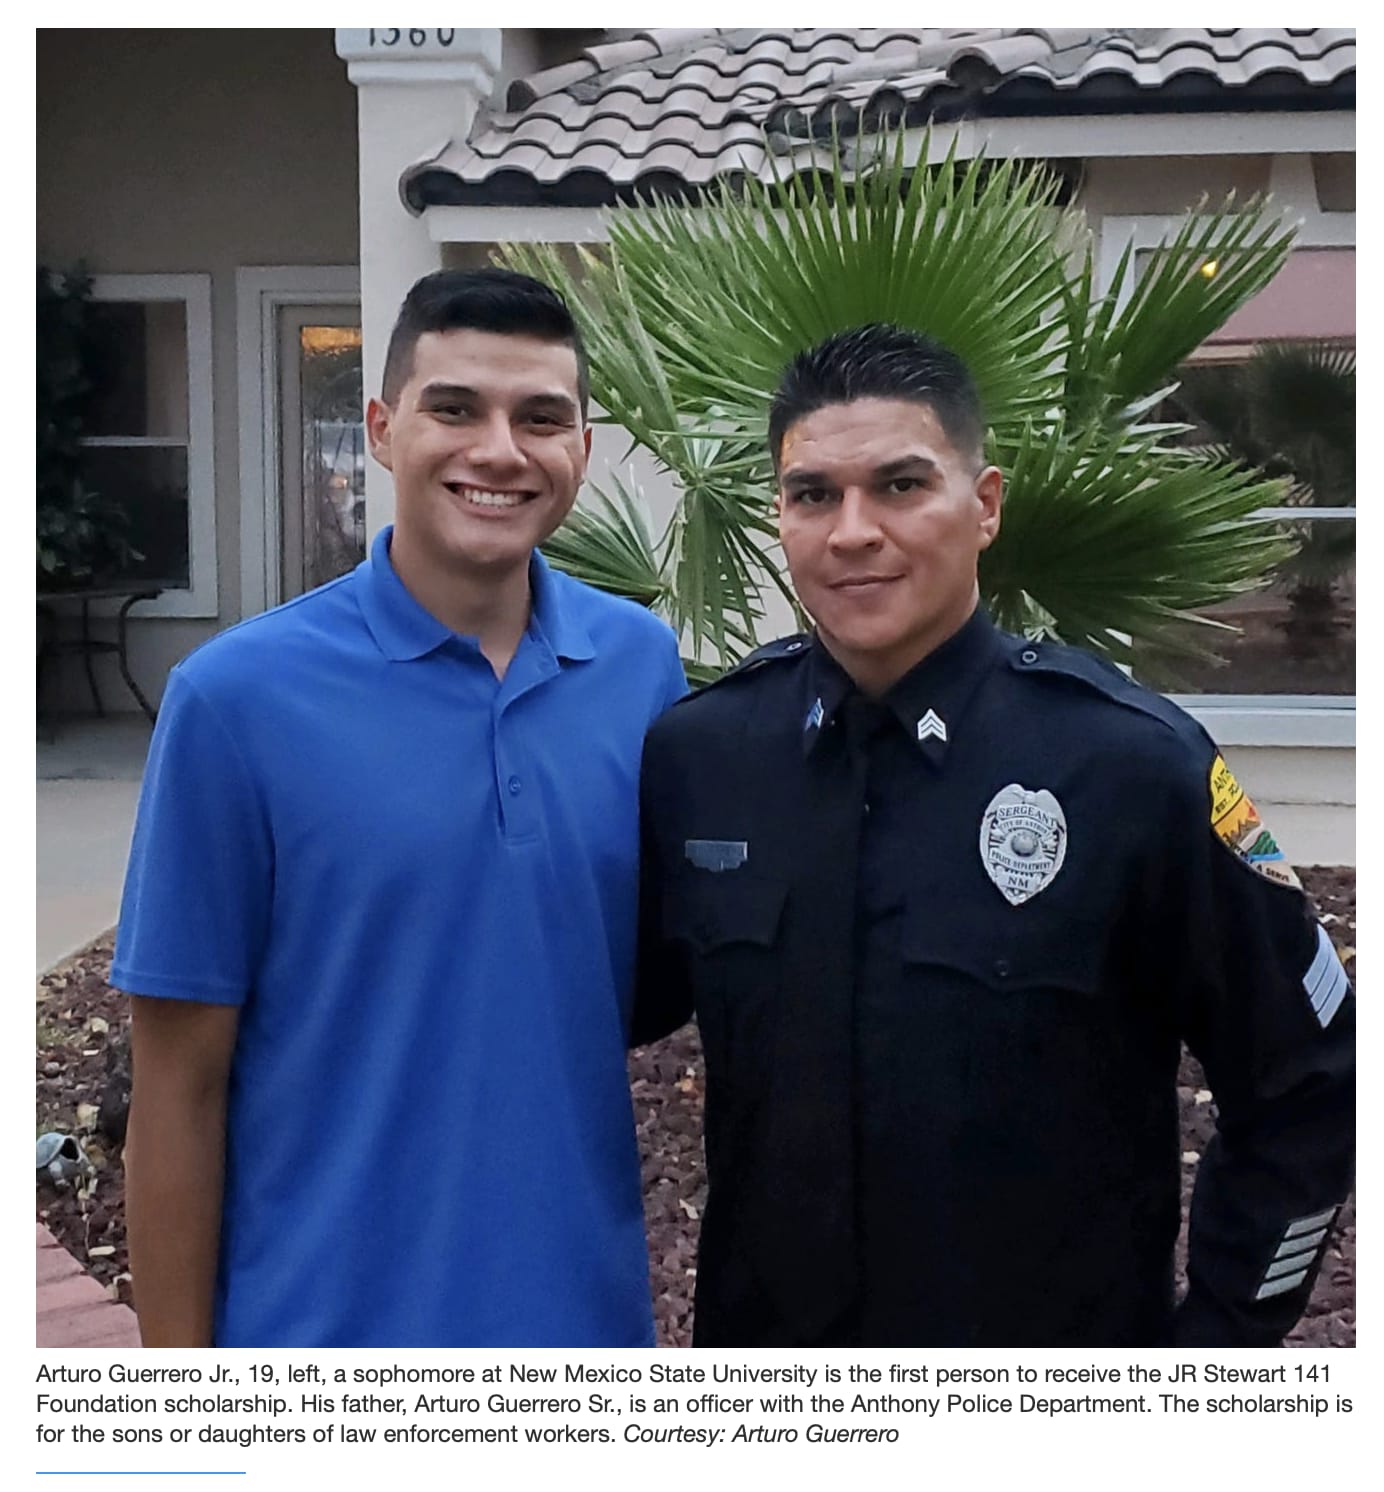 Son of Anthony police officer awarded first J.R. Stewart scholarship